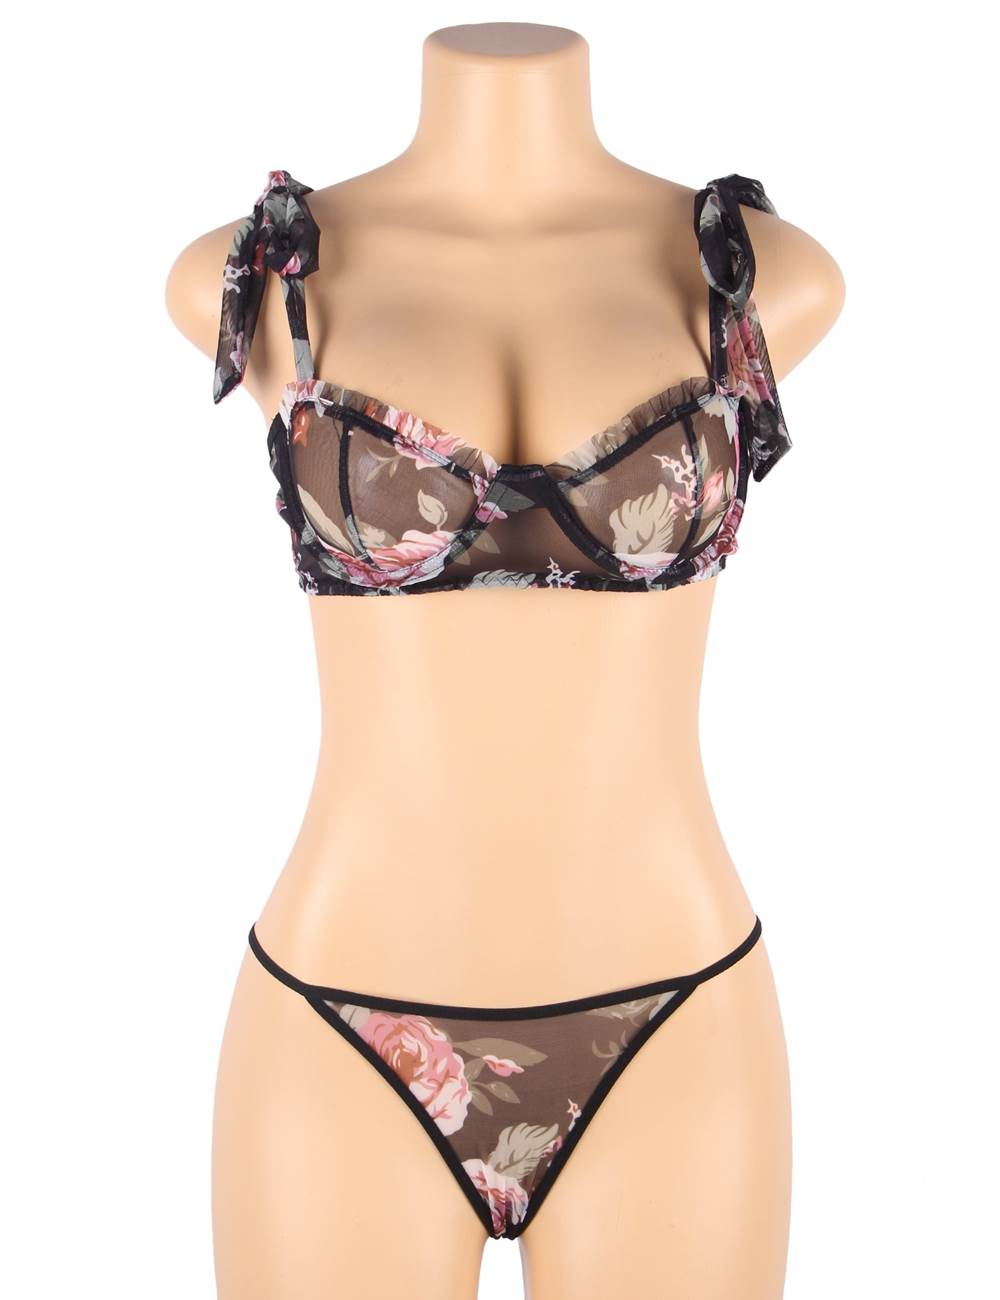 Floral Print Lace Bra Set With Underwire